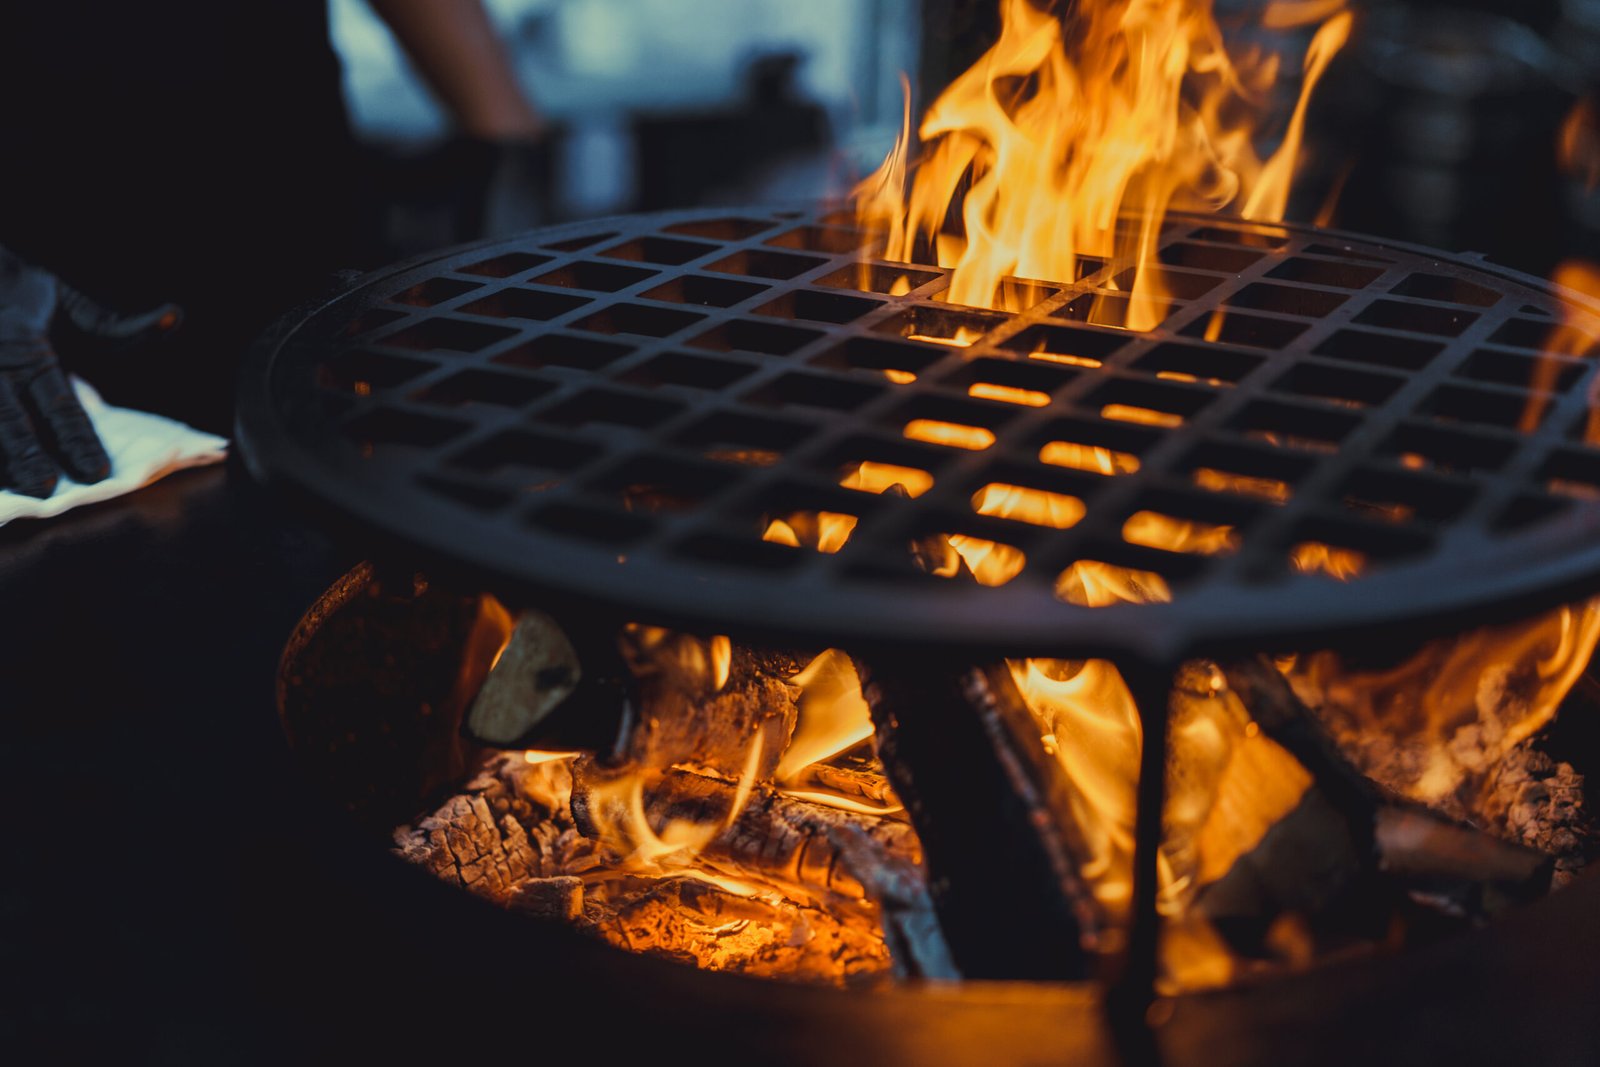 Why are portable charcoal BBQ grills best for Australians?